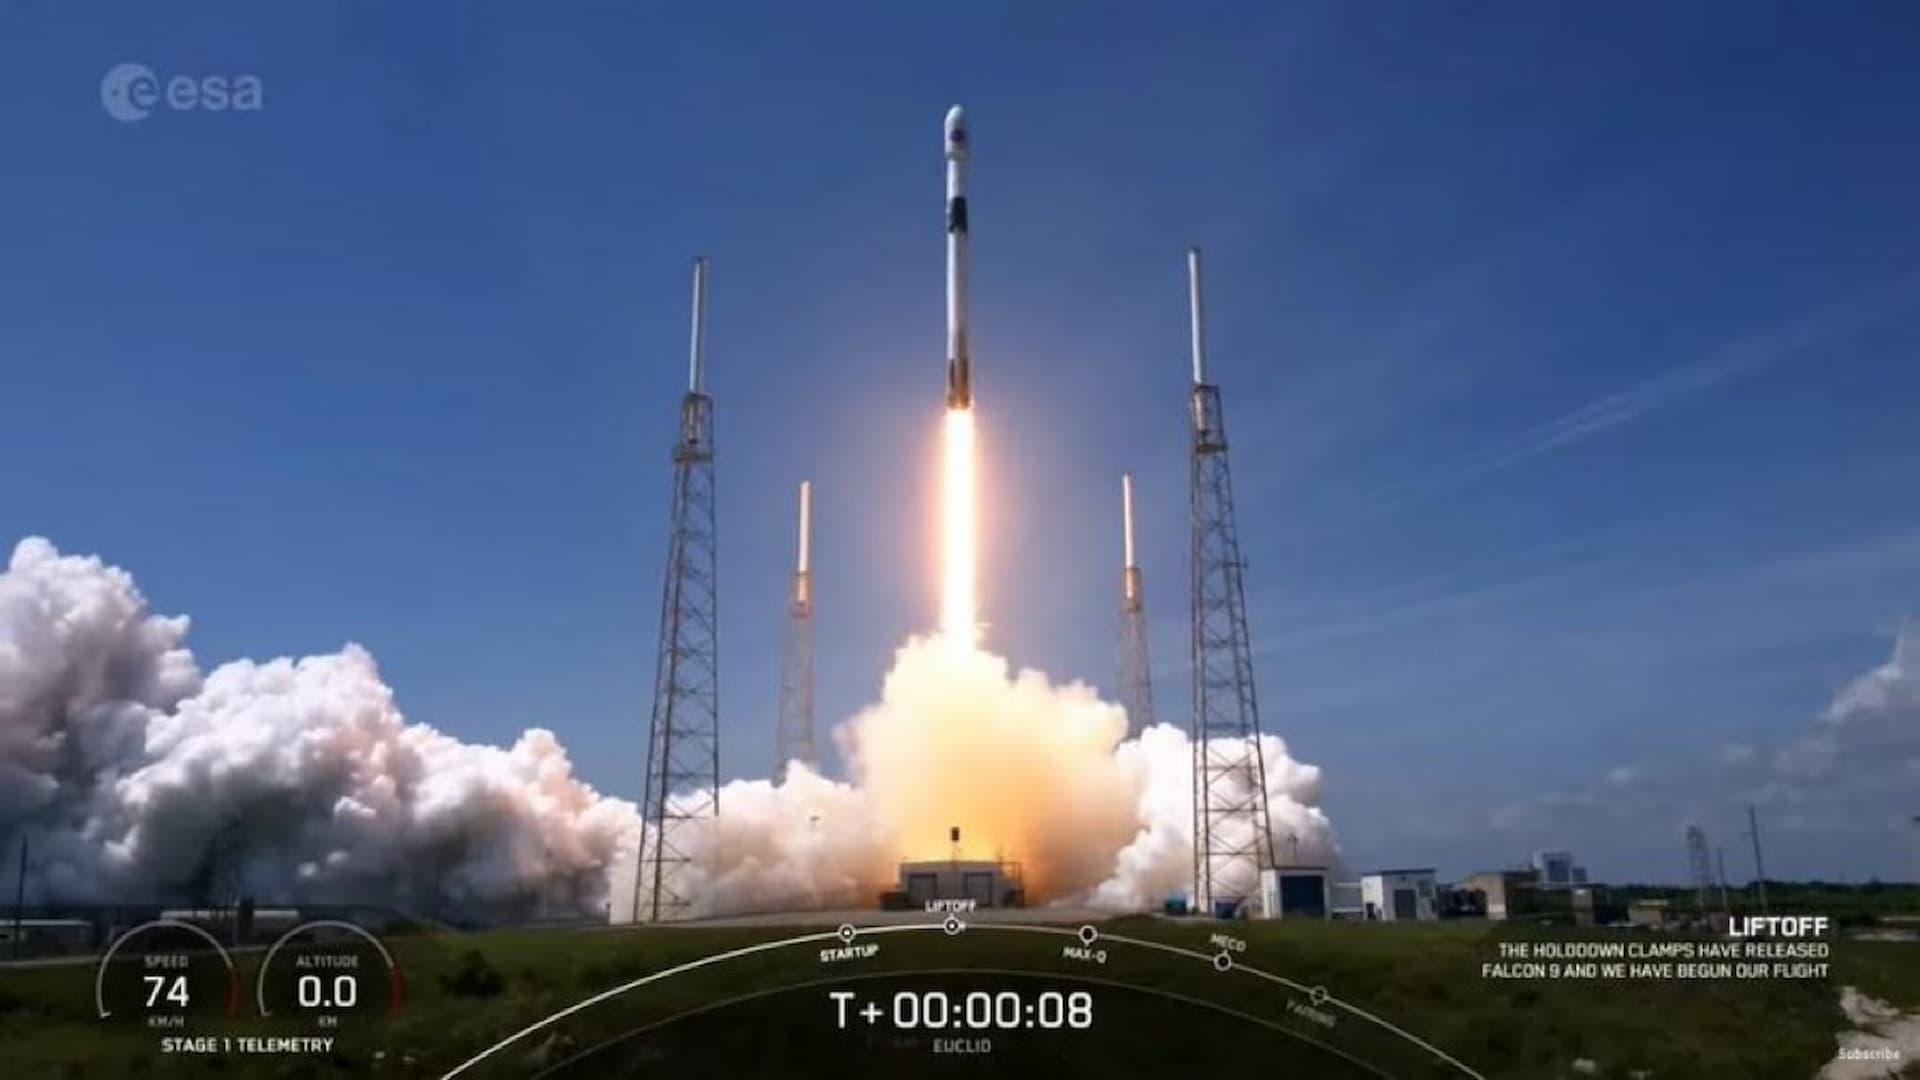 ASI - EUROPE’S EUCLID MISSION LIFTS OFF